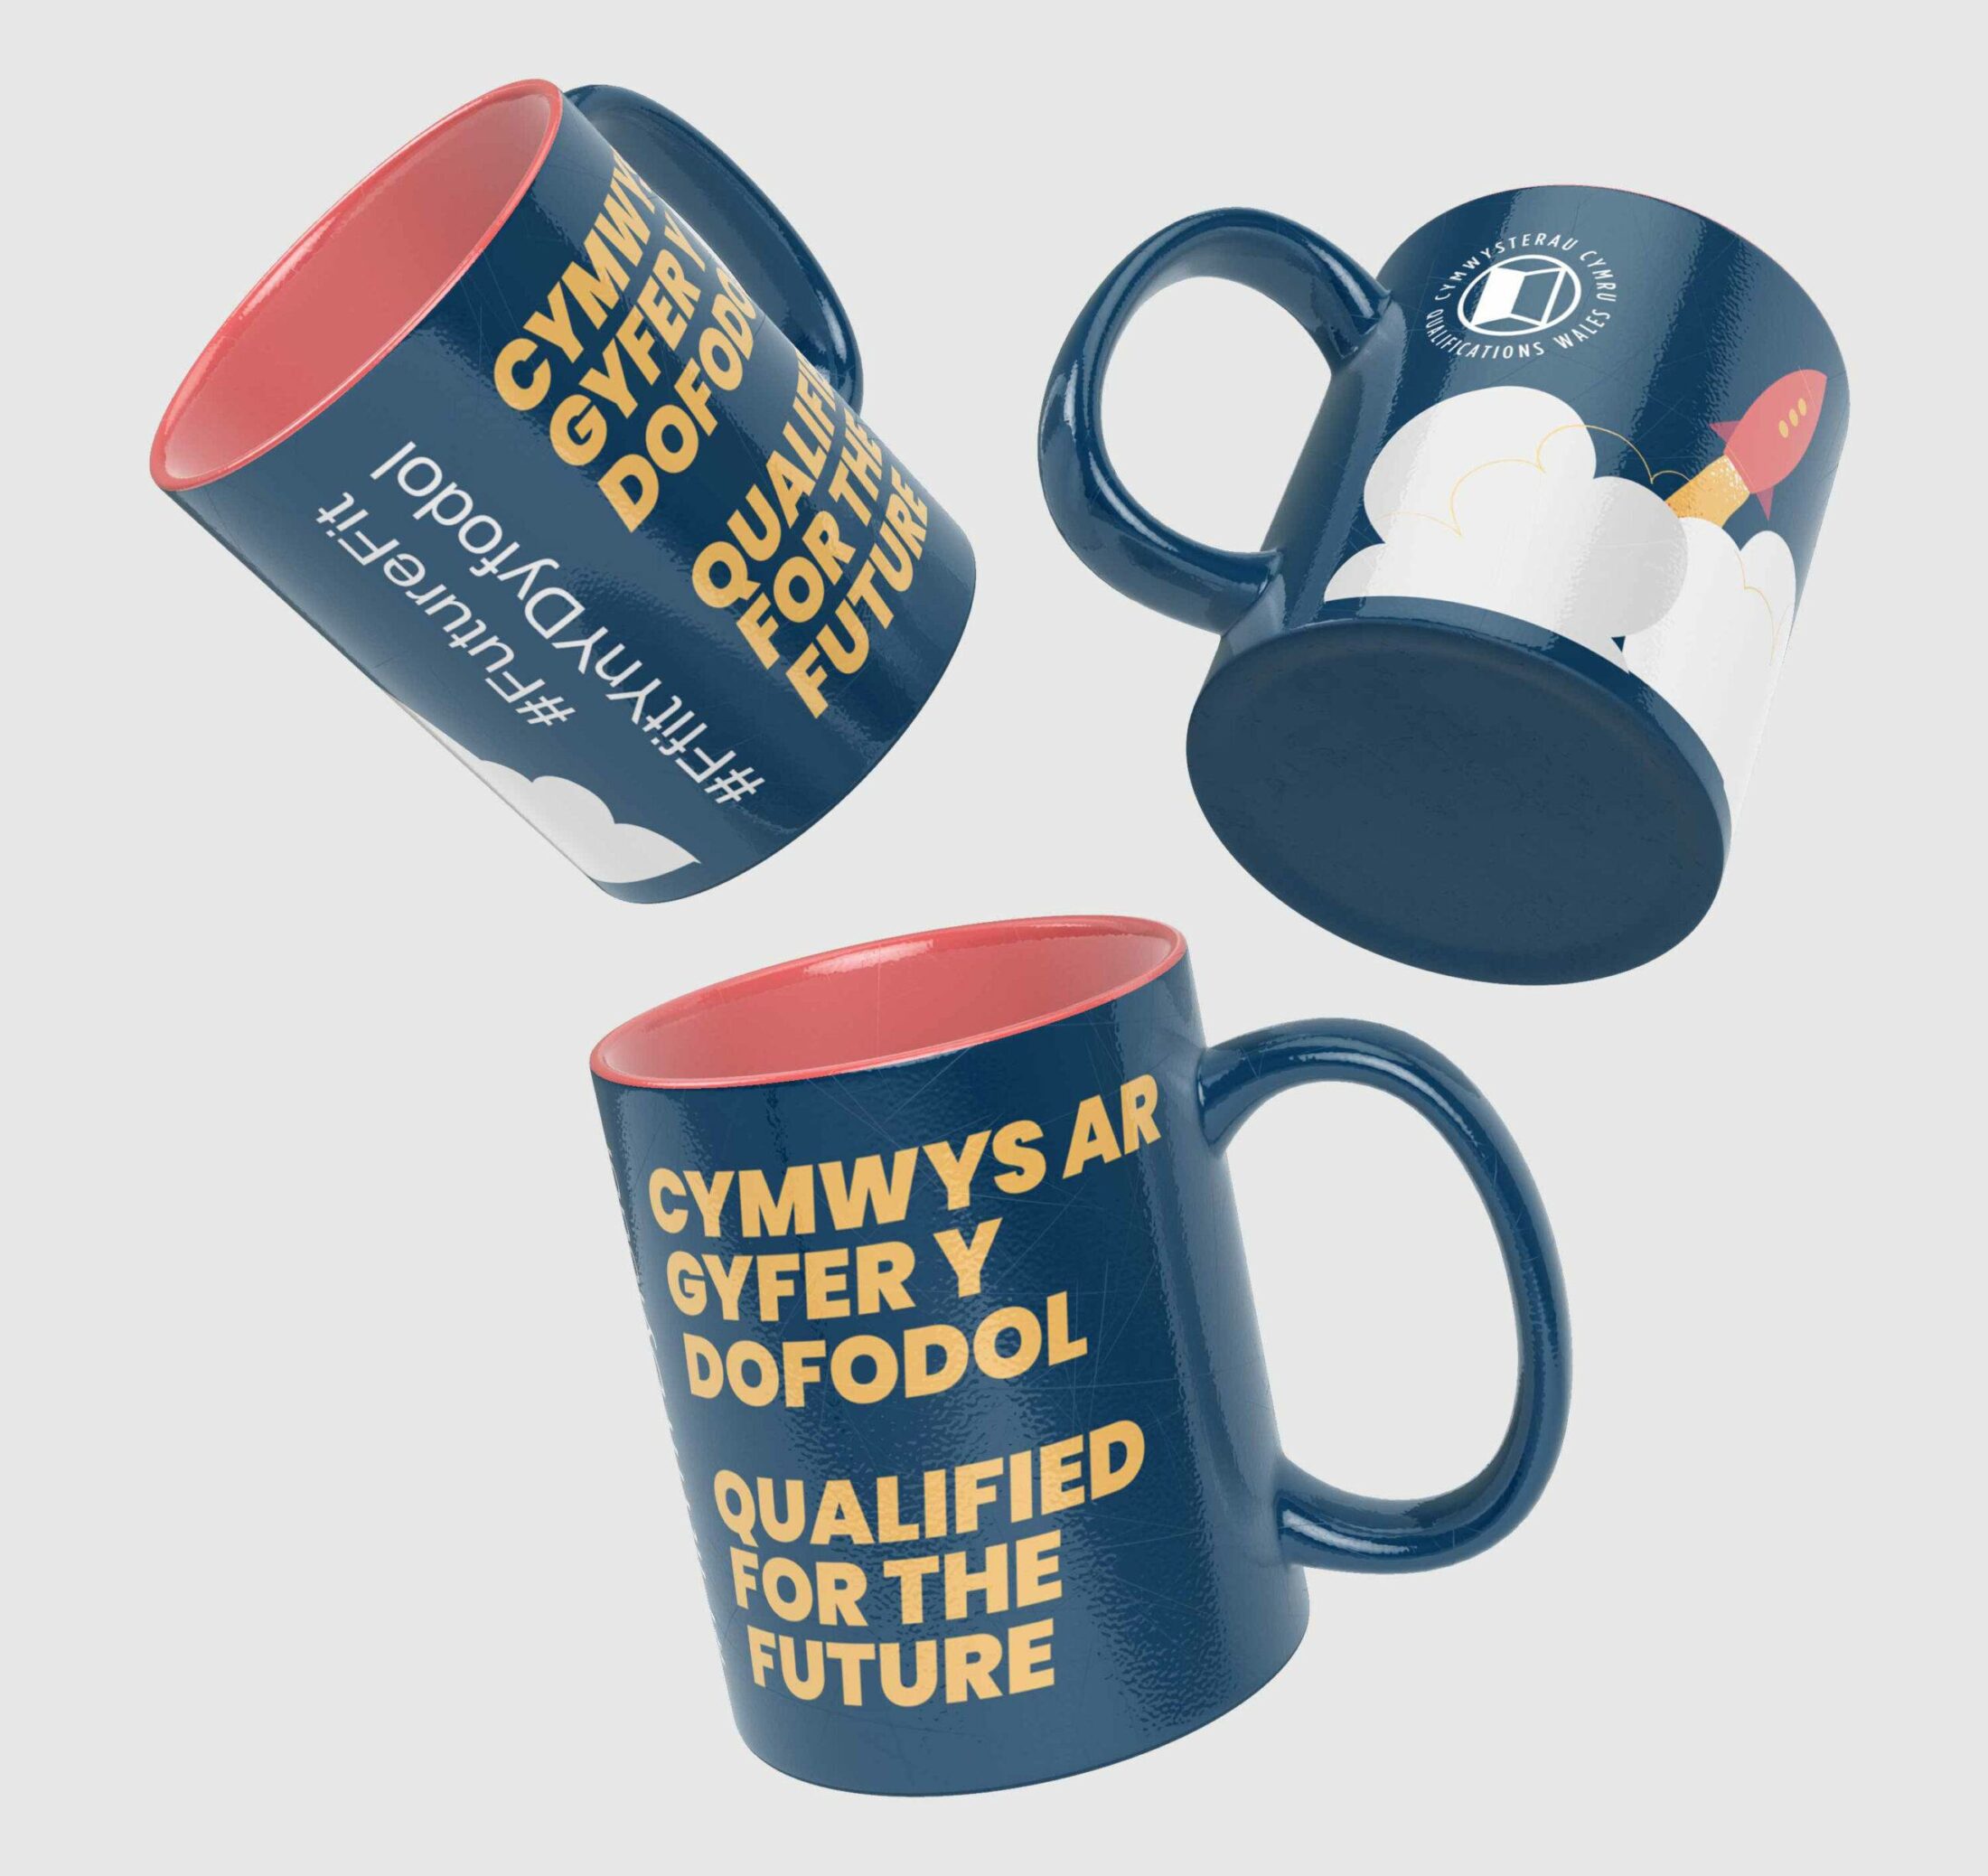 Qualified for the Future branded mugs